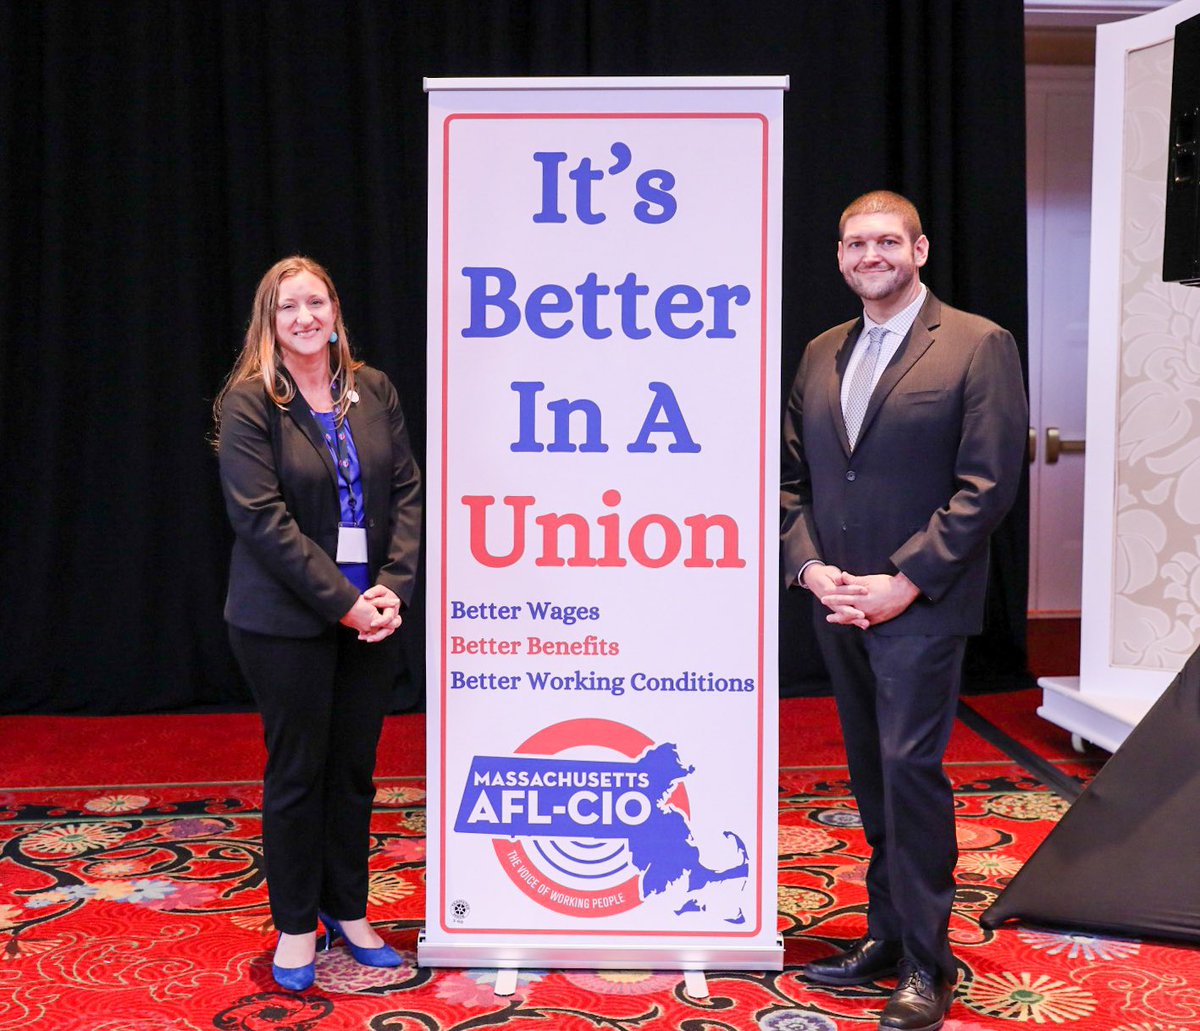 Building on the Past. Ready for the Future. The Massachusetts AFL-CIO just elected brand new leadership! Welcome President Chrissy Lynch and Secretary-Treasurer Kevin Brousseau, along with a dynamic Executive Council consisting of leaders from all industries #unionstrong